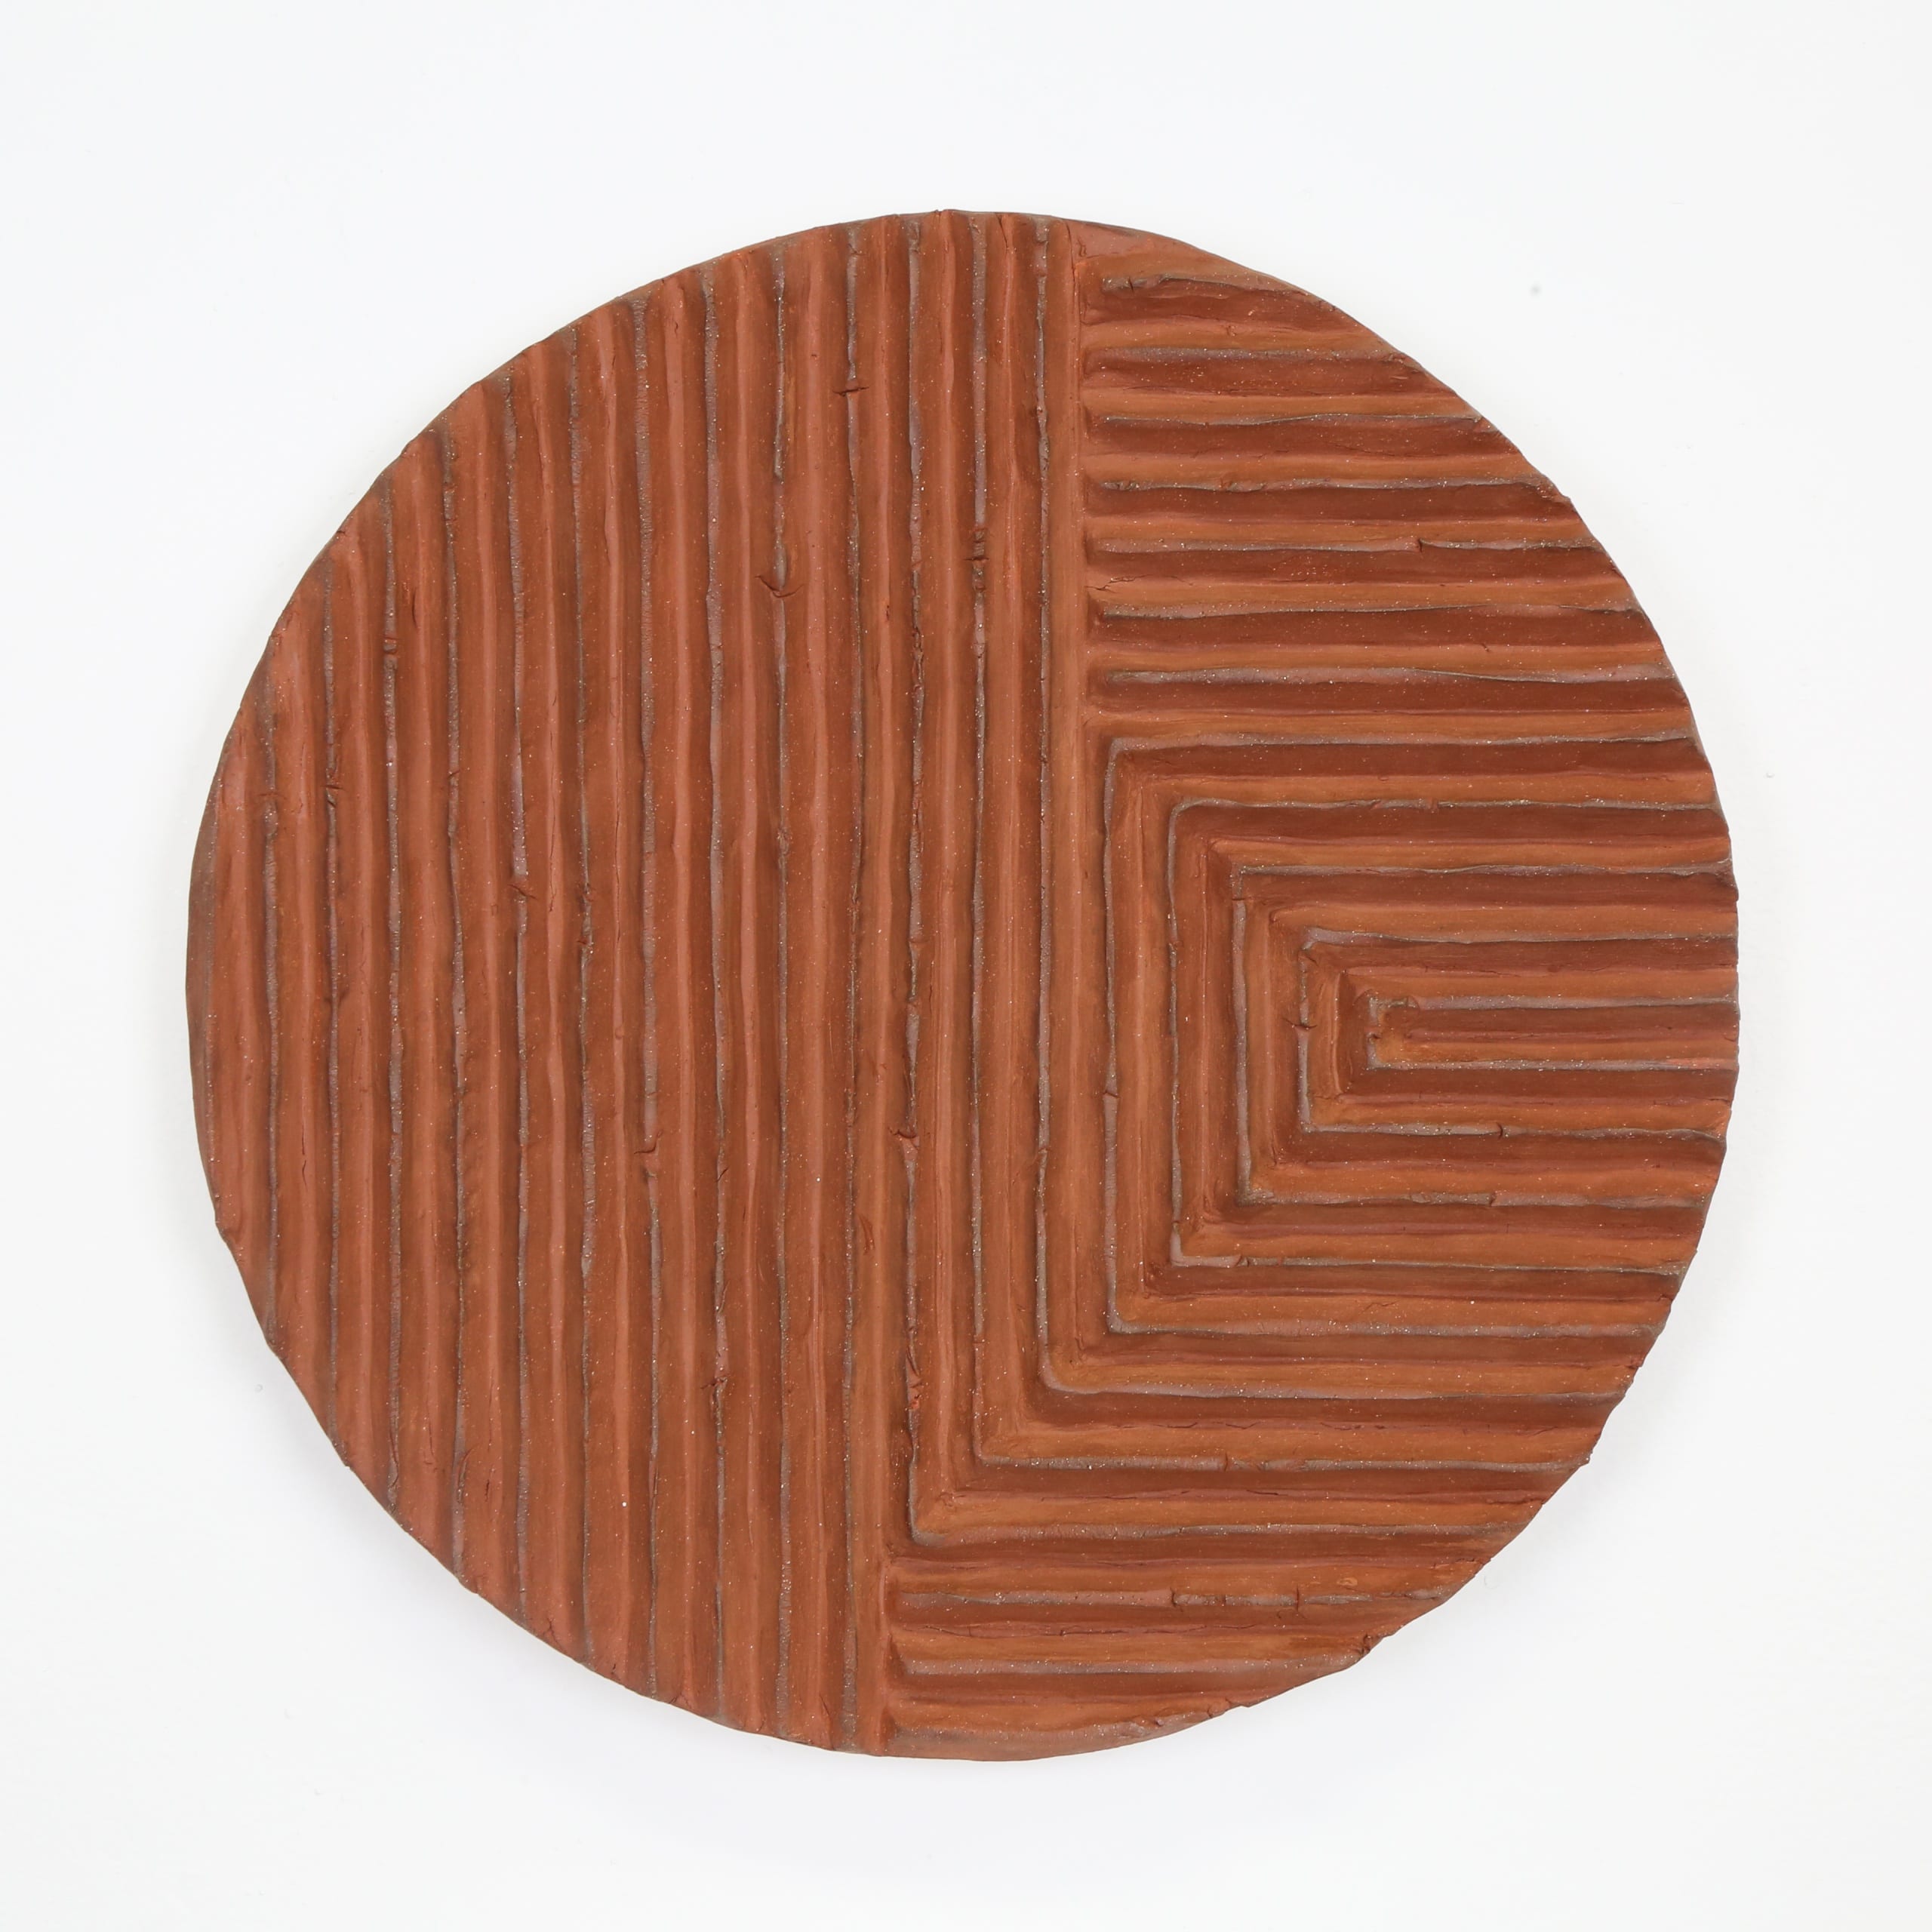 Color photograph of a terra-cotta disk with a series of raised, parallel lines sculpted onto its front. The lines run up and down vertically on the left, and toward the object’s right the lines are horizontal. The object appears to be unglazed.